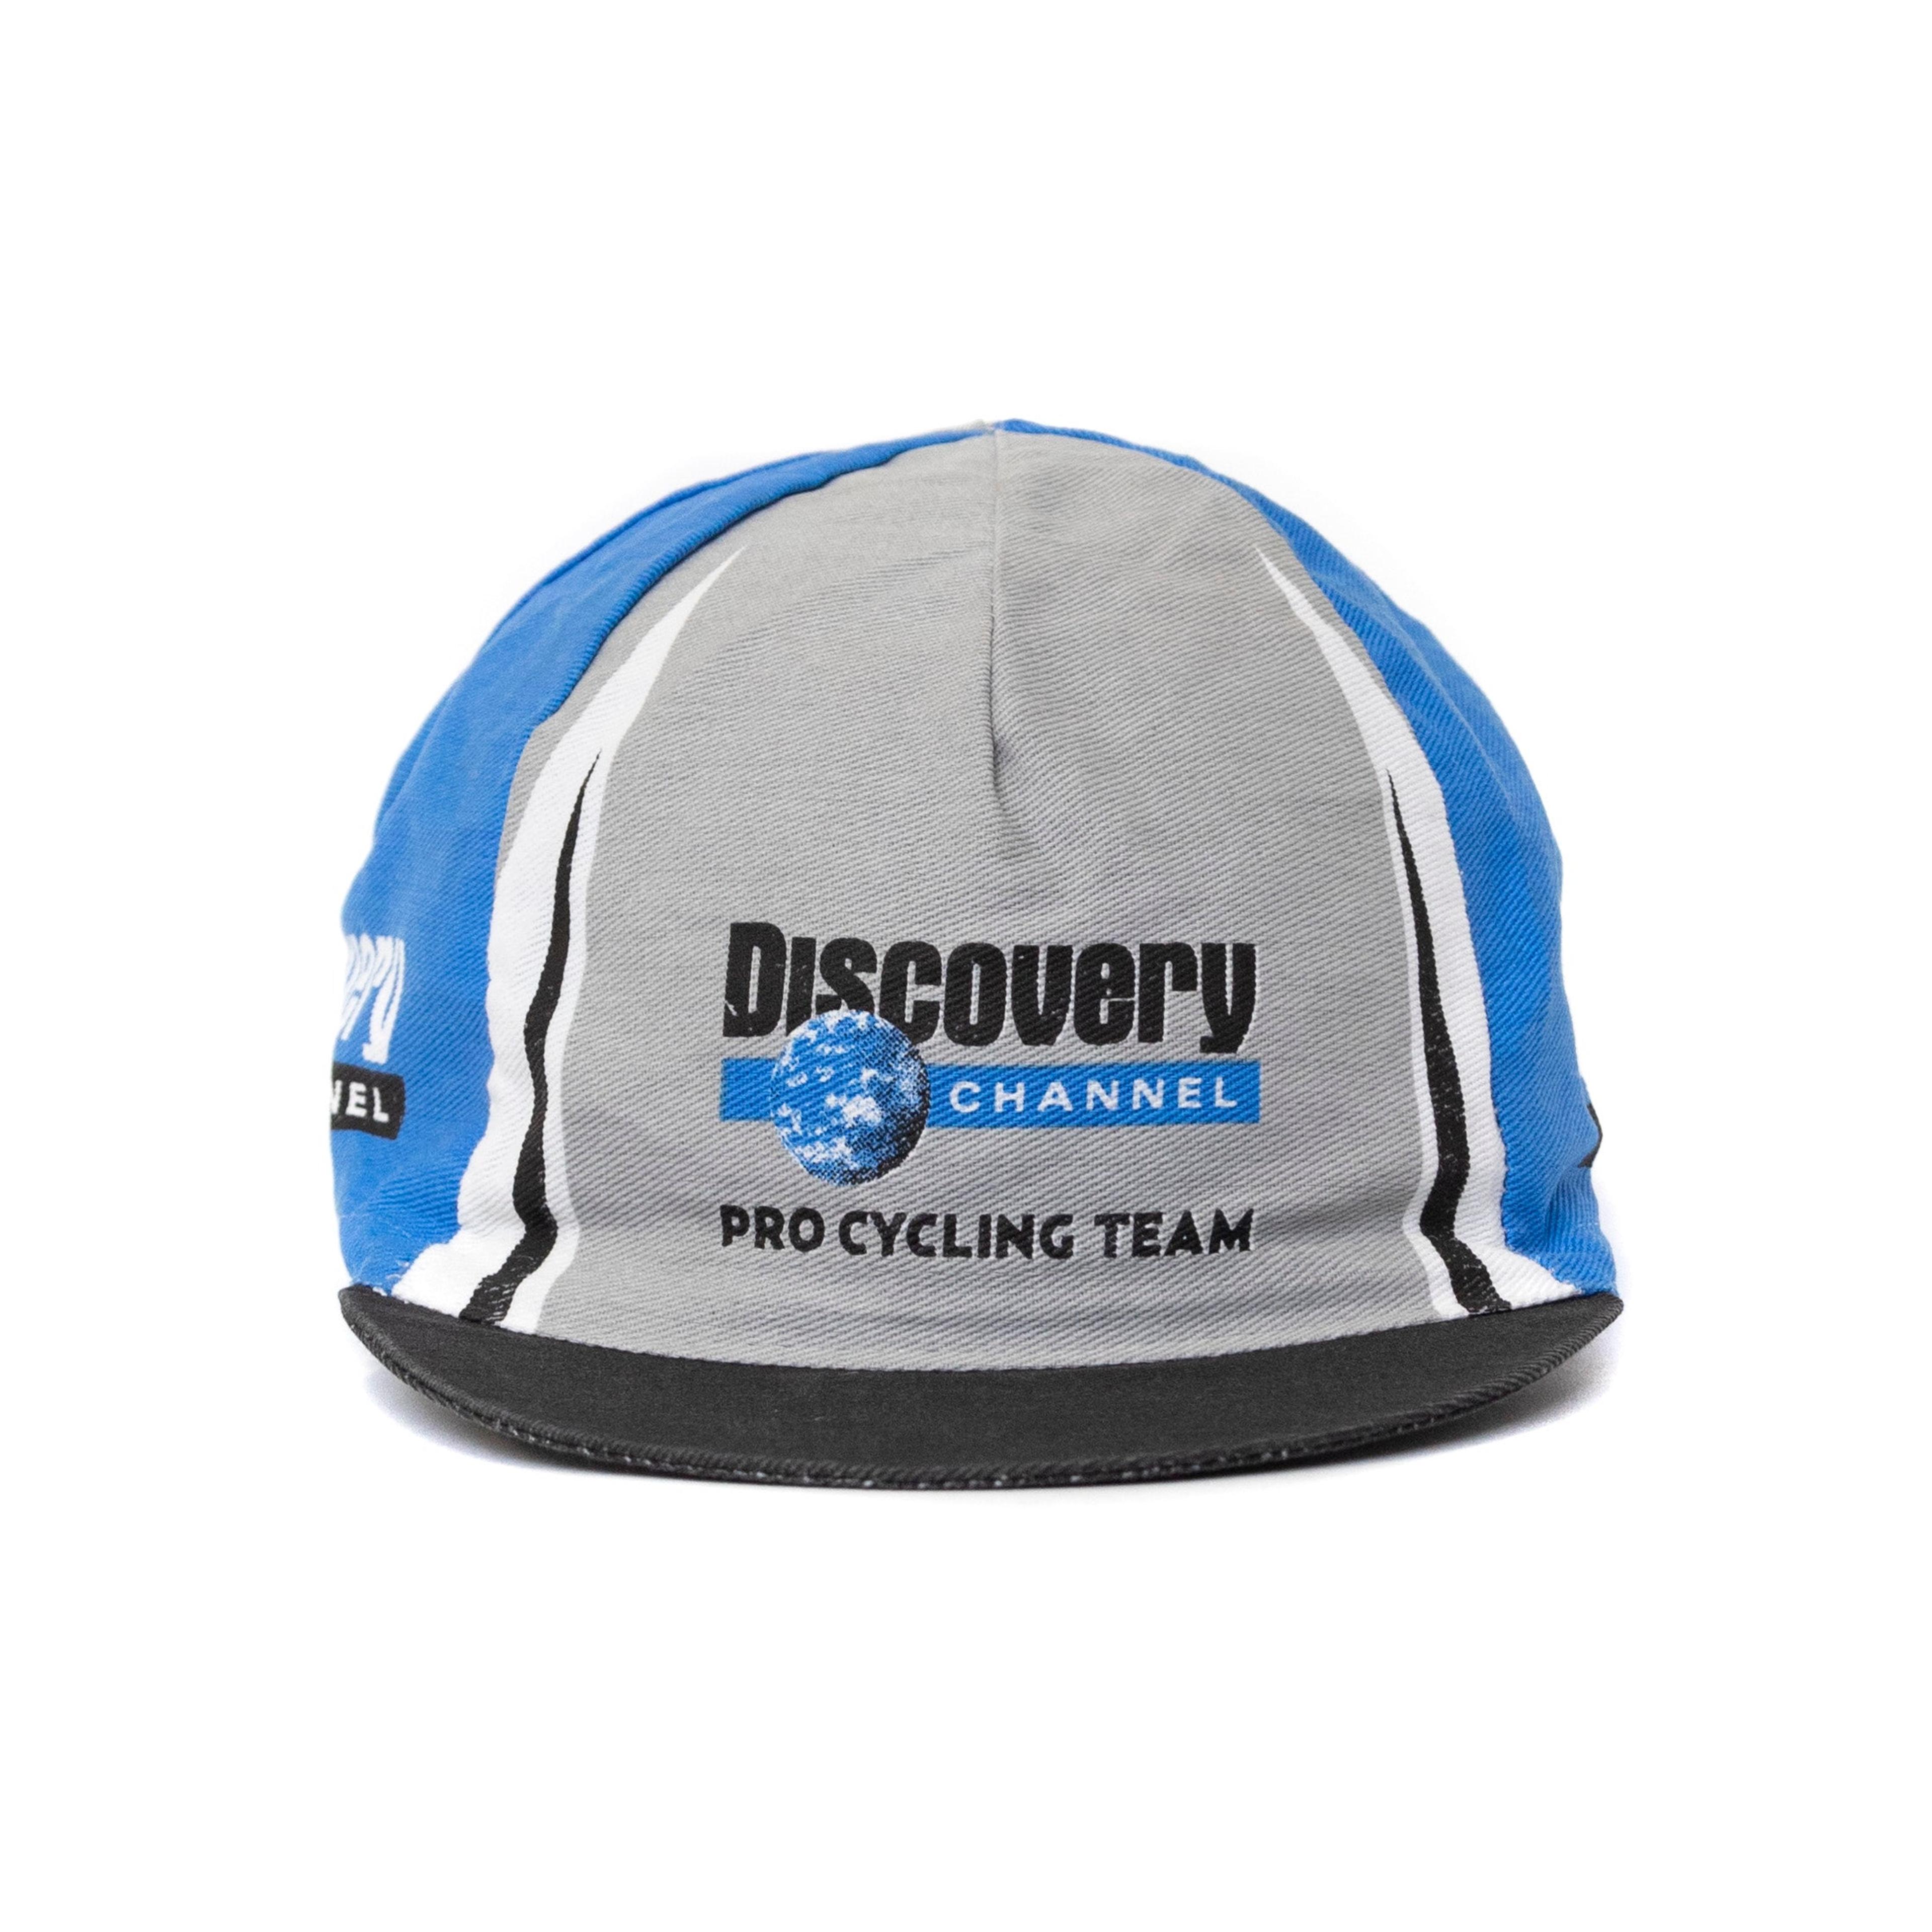 Discovery Channel Pro Cycling Team Cap